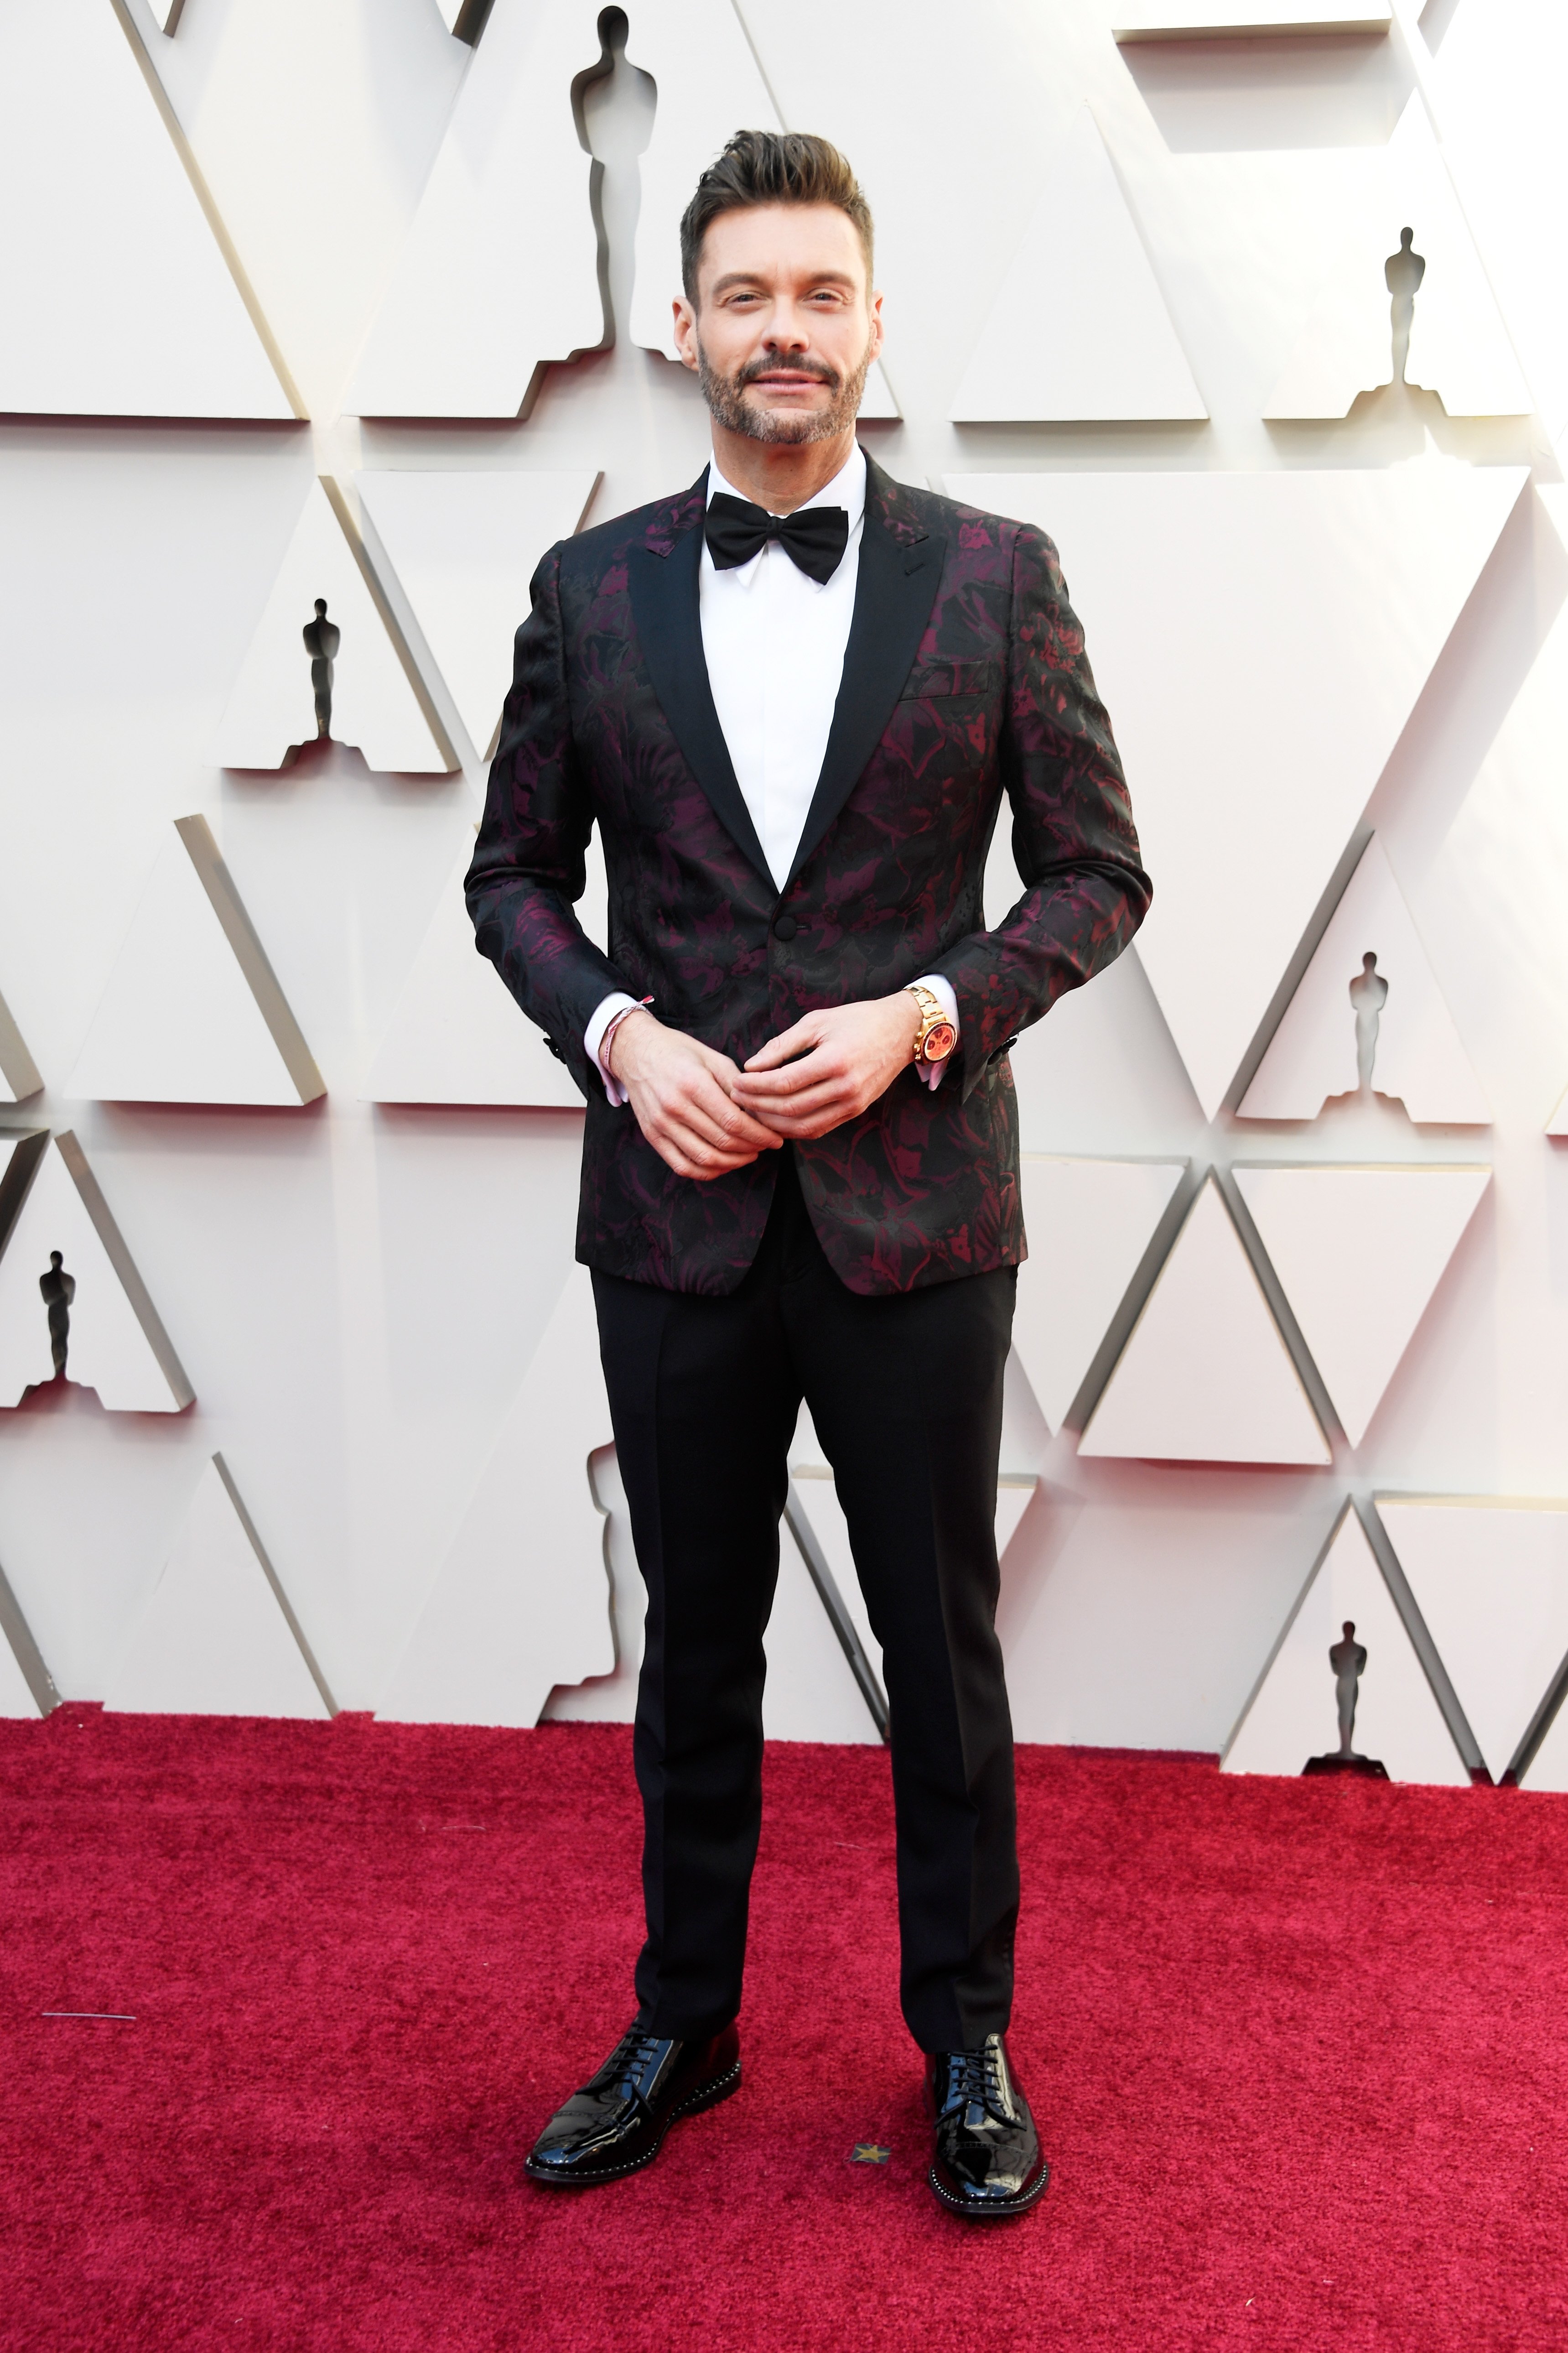 Ryan Seacrest at the 91st Annual Academy Awards at Hollywood and Highland on February 24, 2019 | Photo: Getty Images